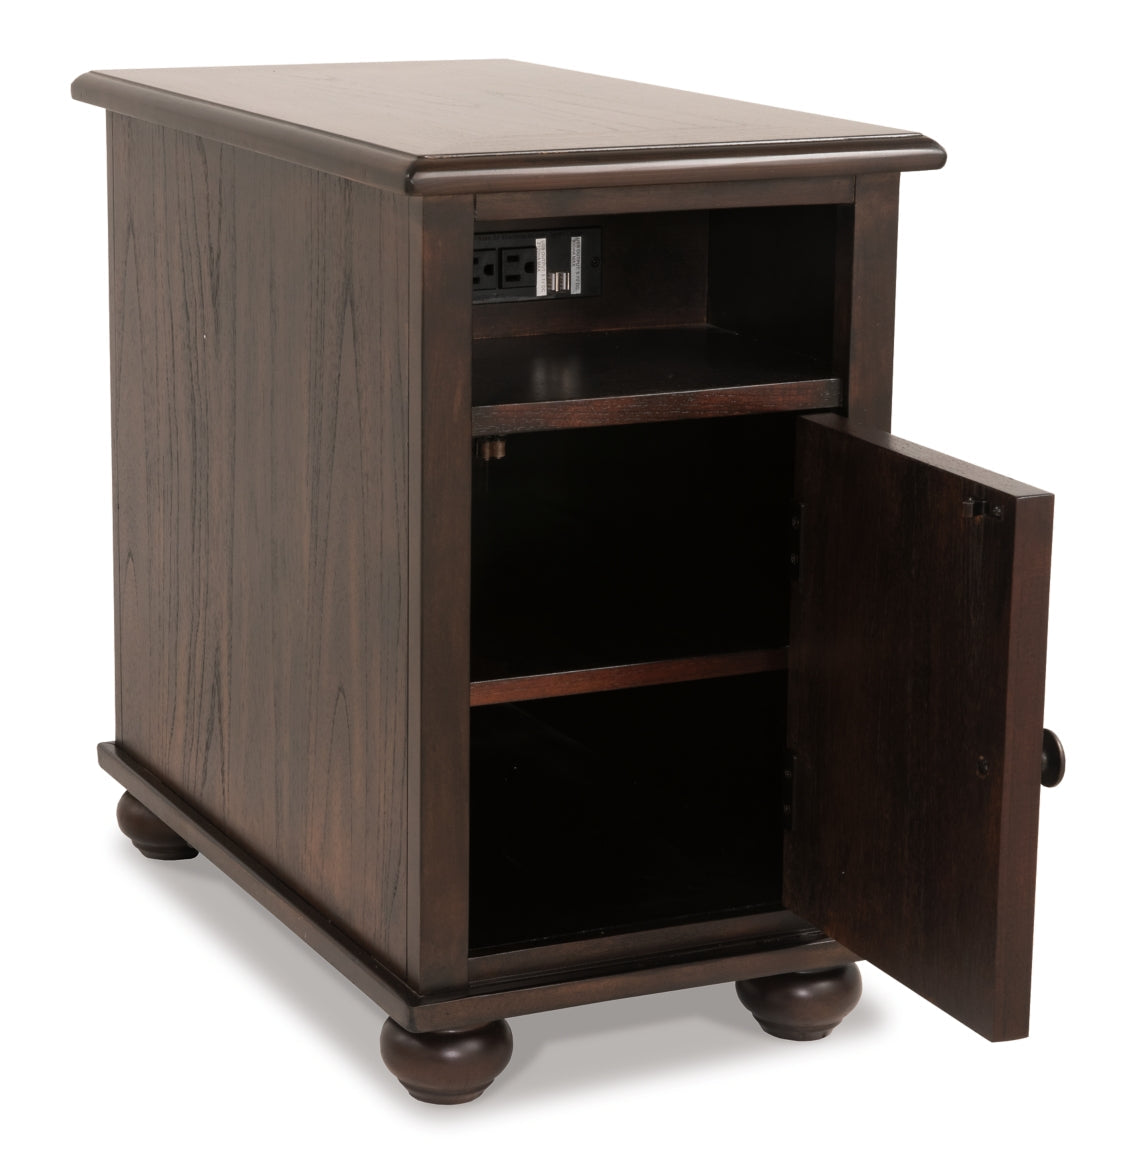 Barilanni Chairside End Table with USB Ports & Outlets - furniture place usa